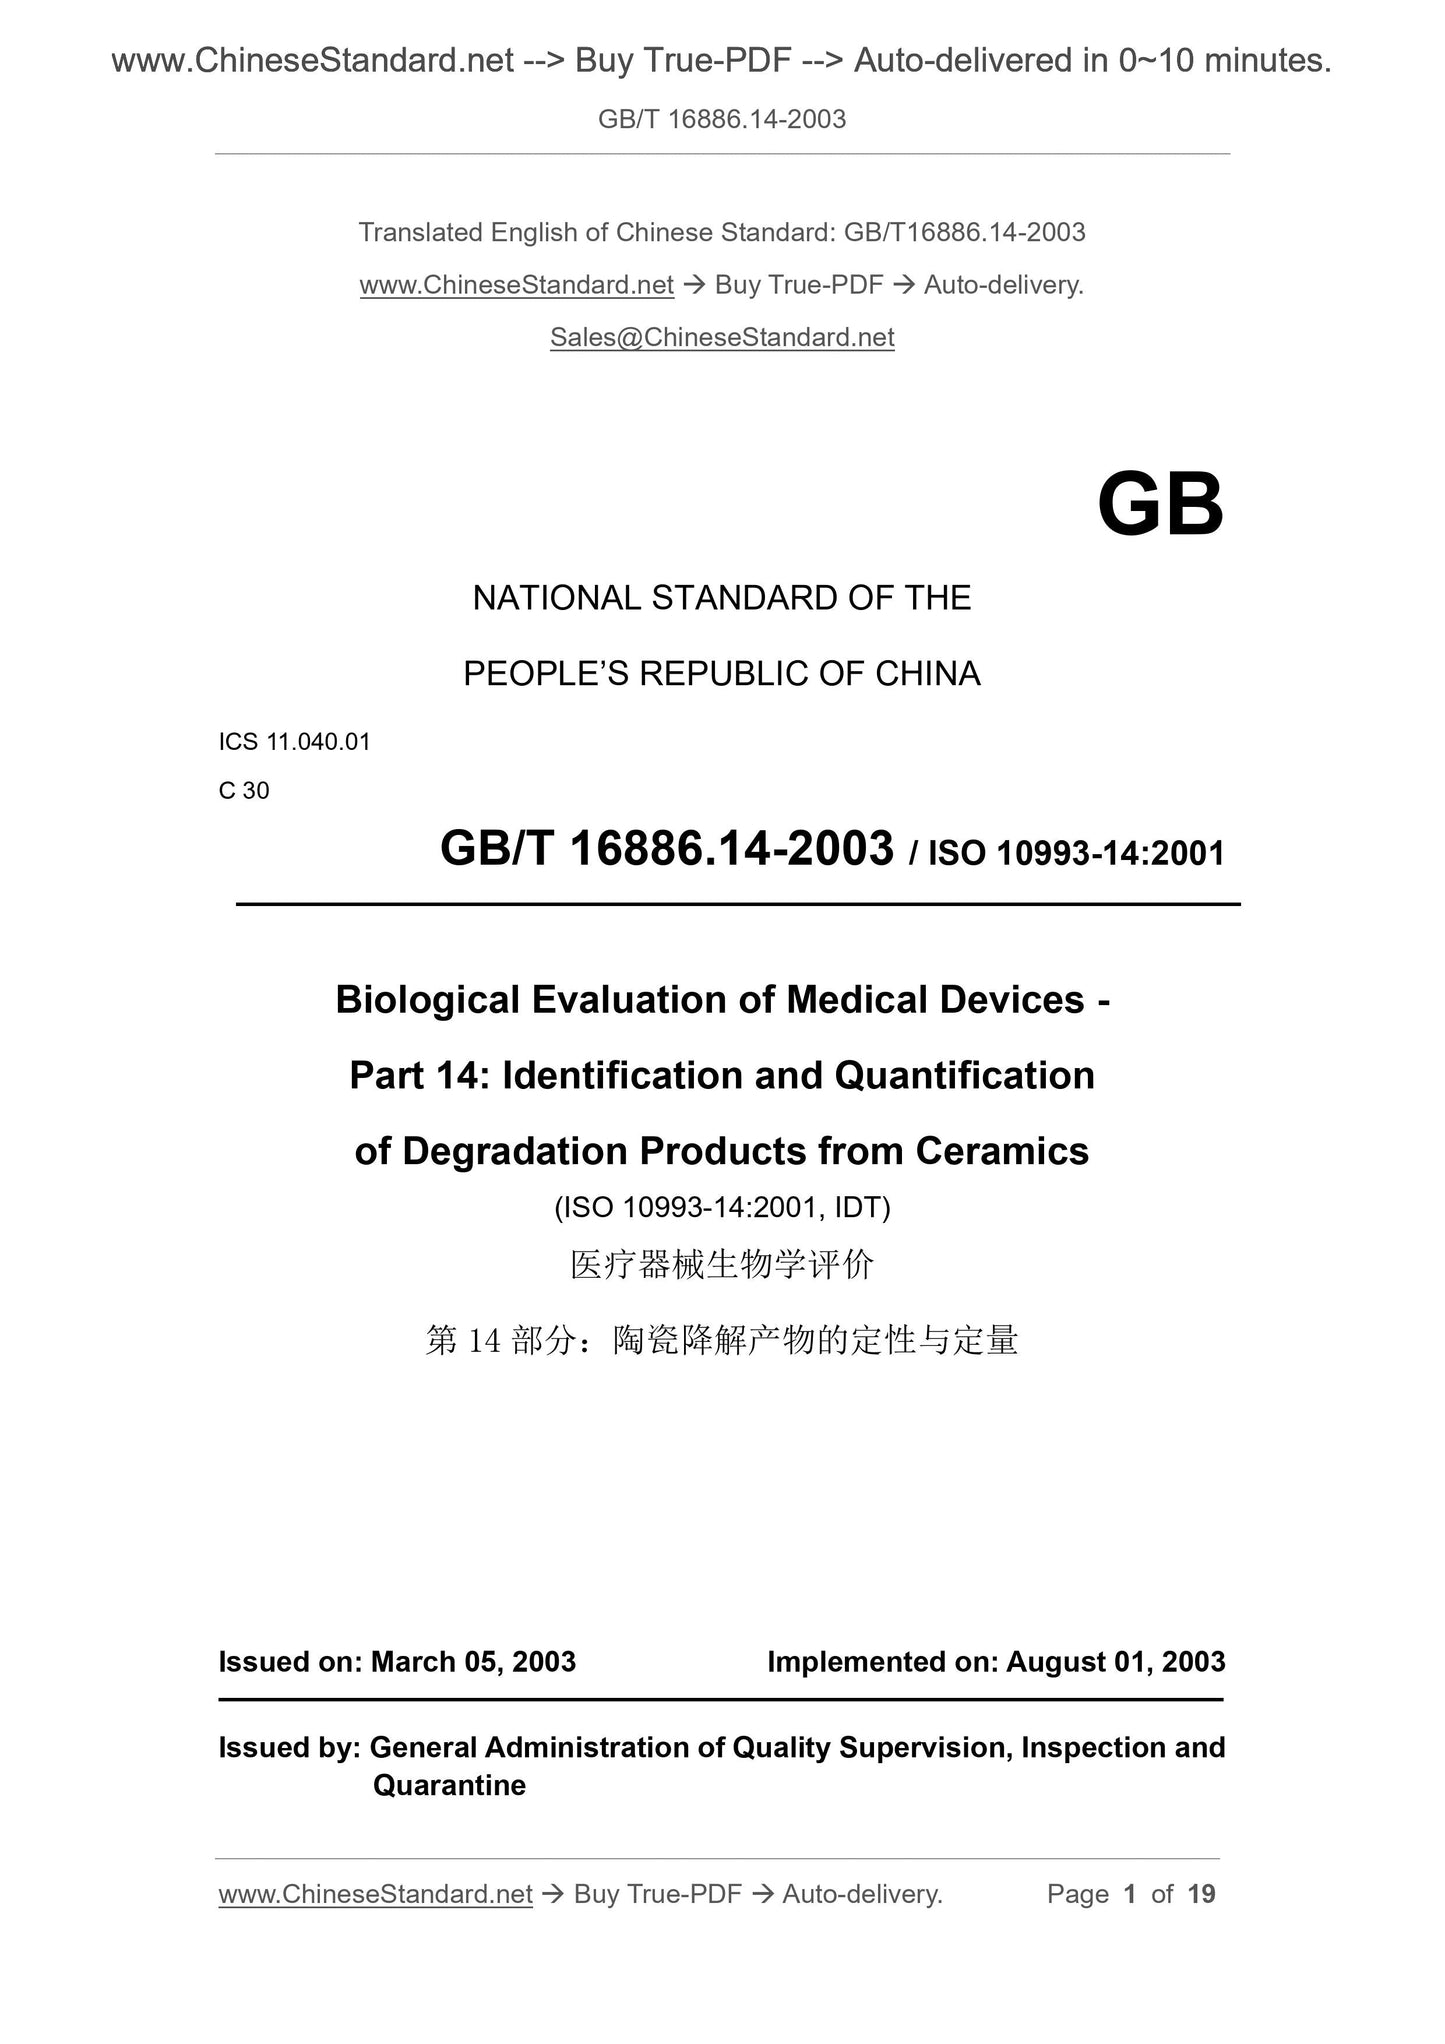 GB/T 16886.14-2003 Page 1